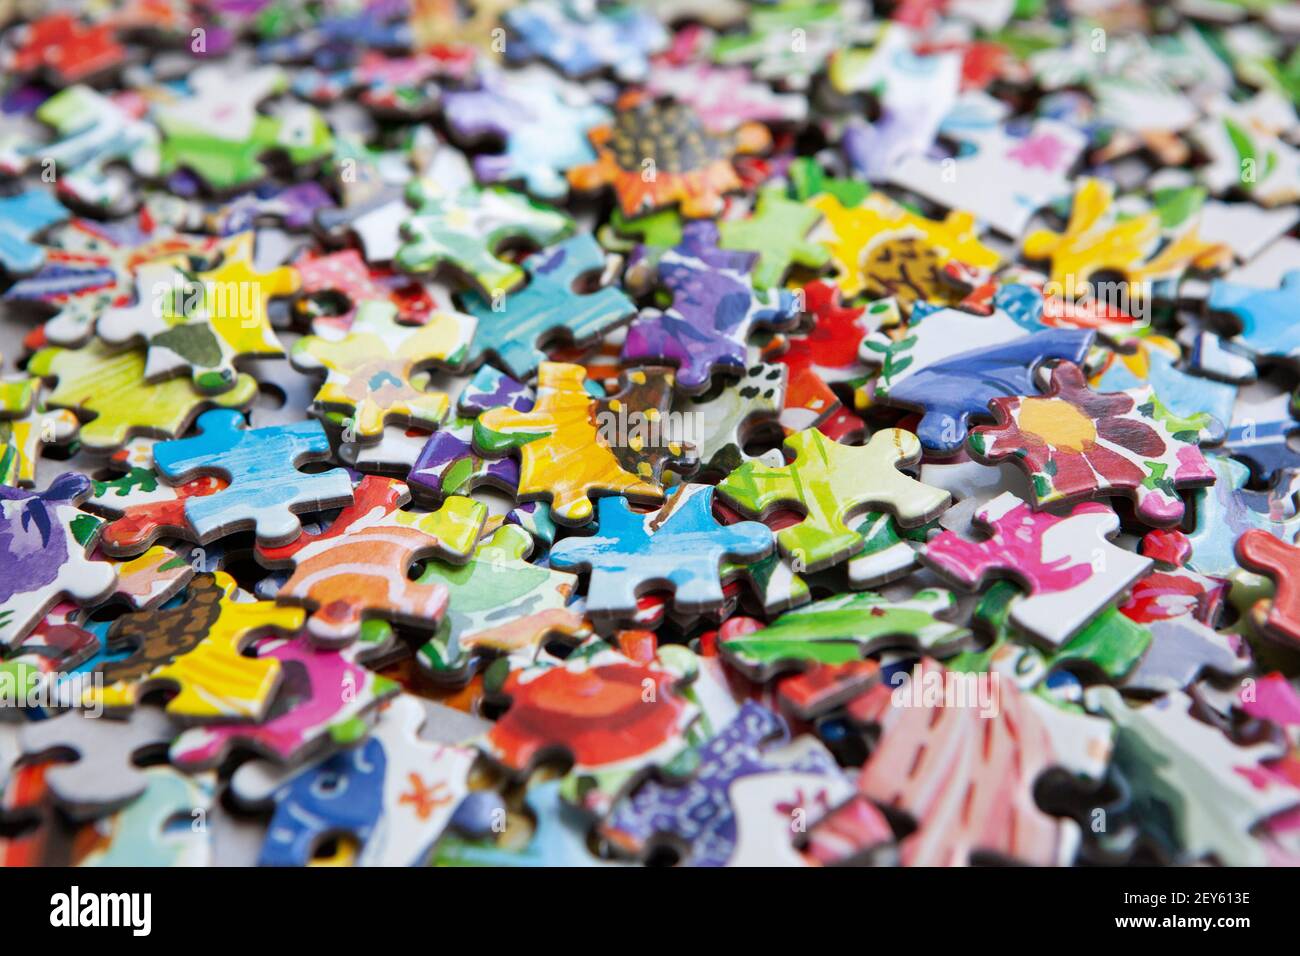 London, UK, 5 March 2021: a box of colourful jigsaw pieces. During the pandemic lockdowns sales of jigsaws have risen as people look for ways to pass Stock Photo